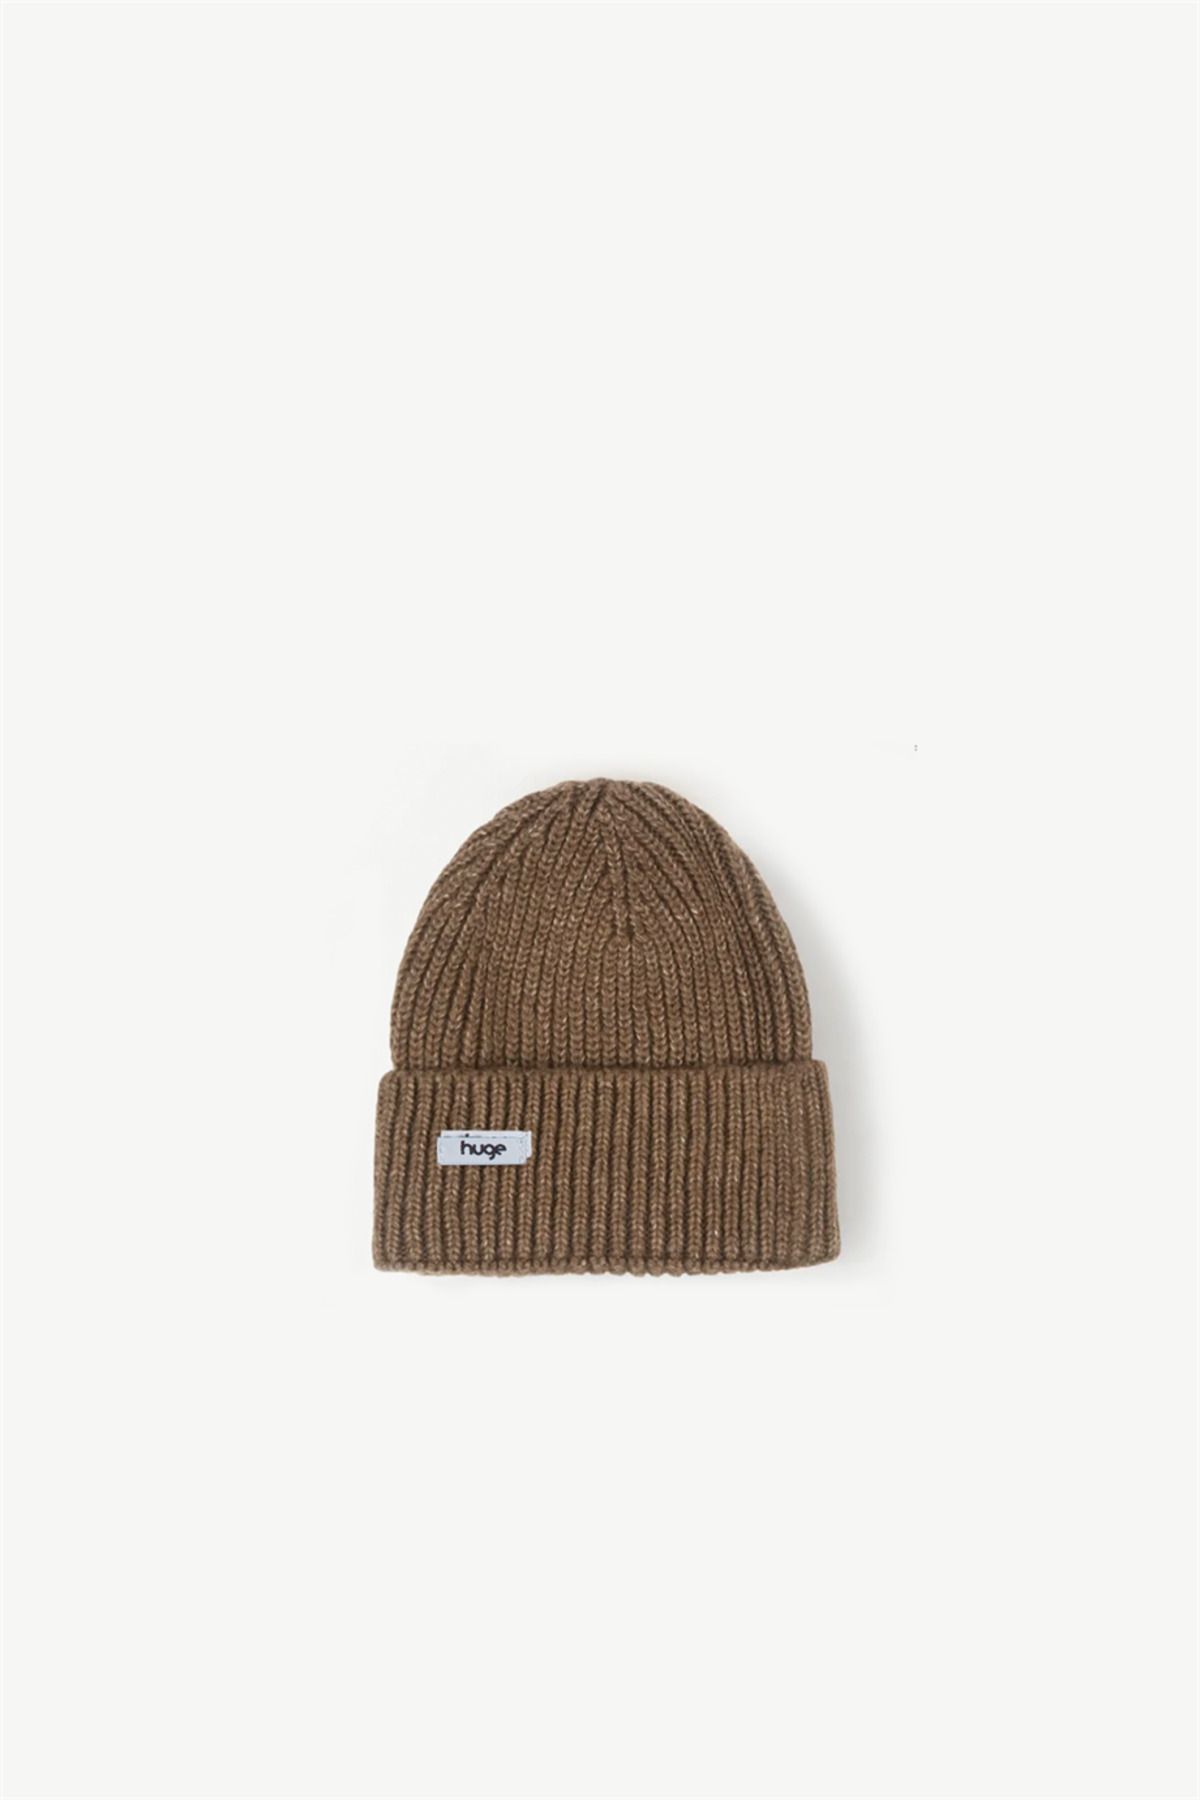 Huge Element Huge Beanie Small Tag Brown